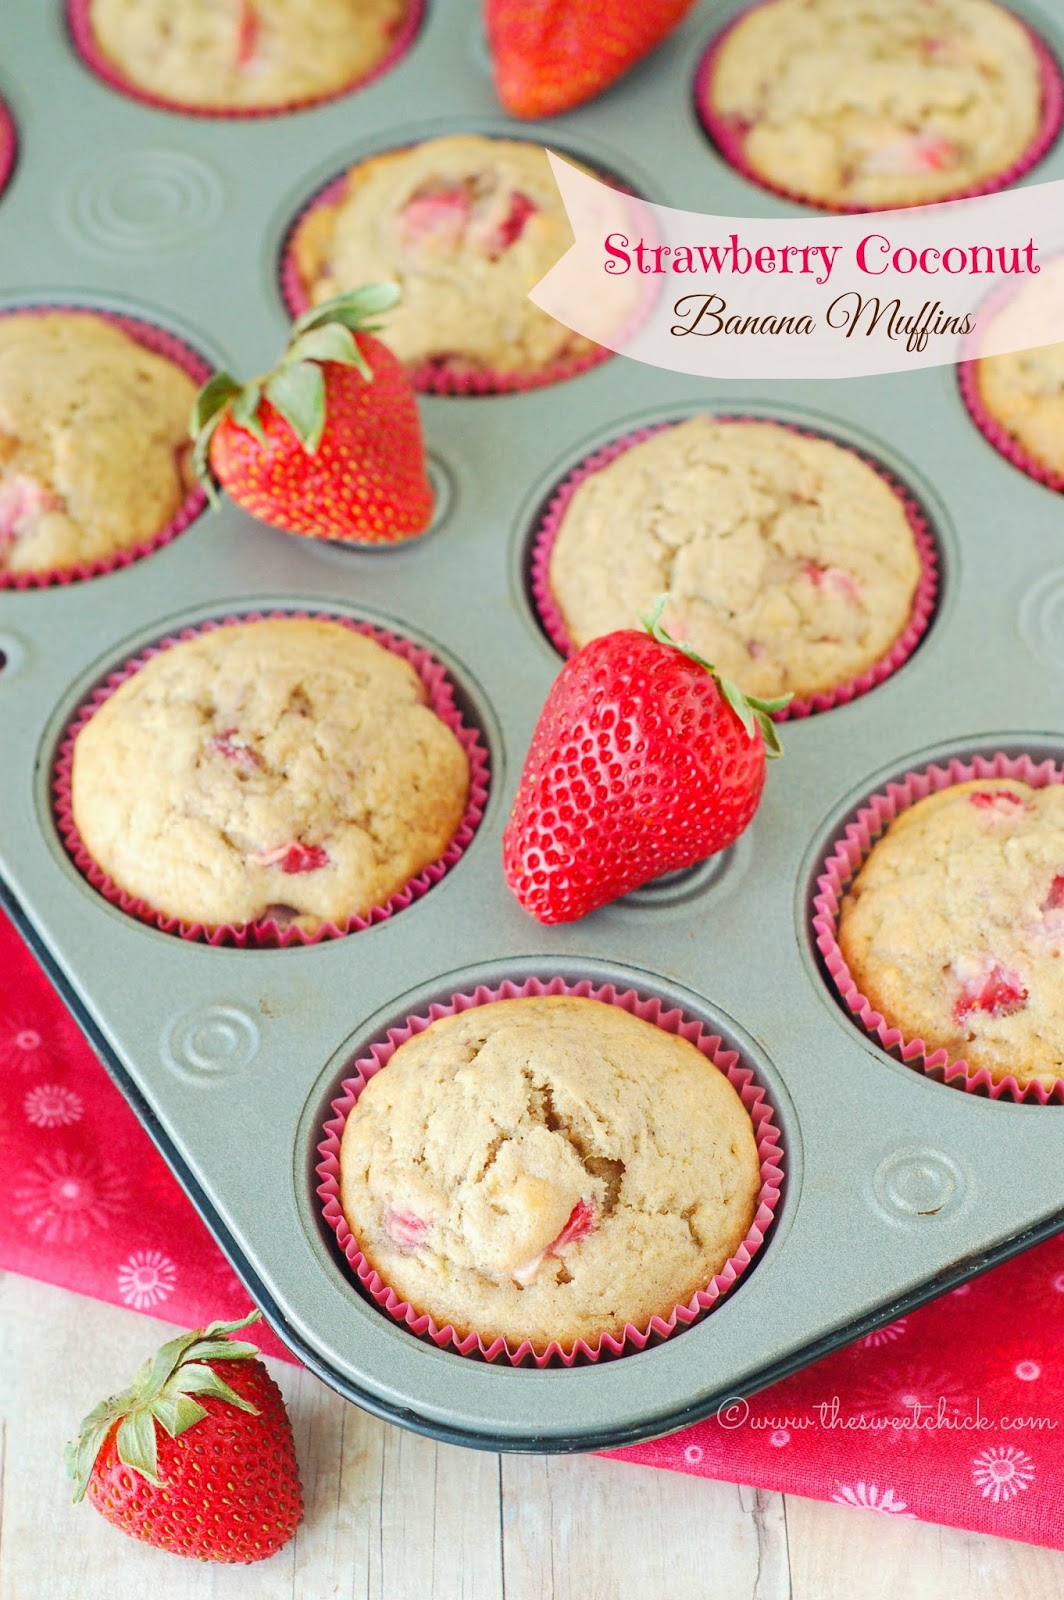 Strawberry Coconut Banana Muffins by The Sweet Chick